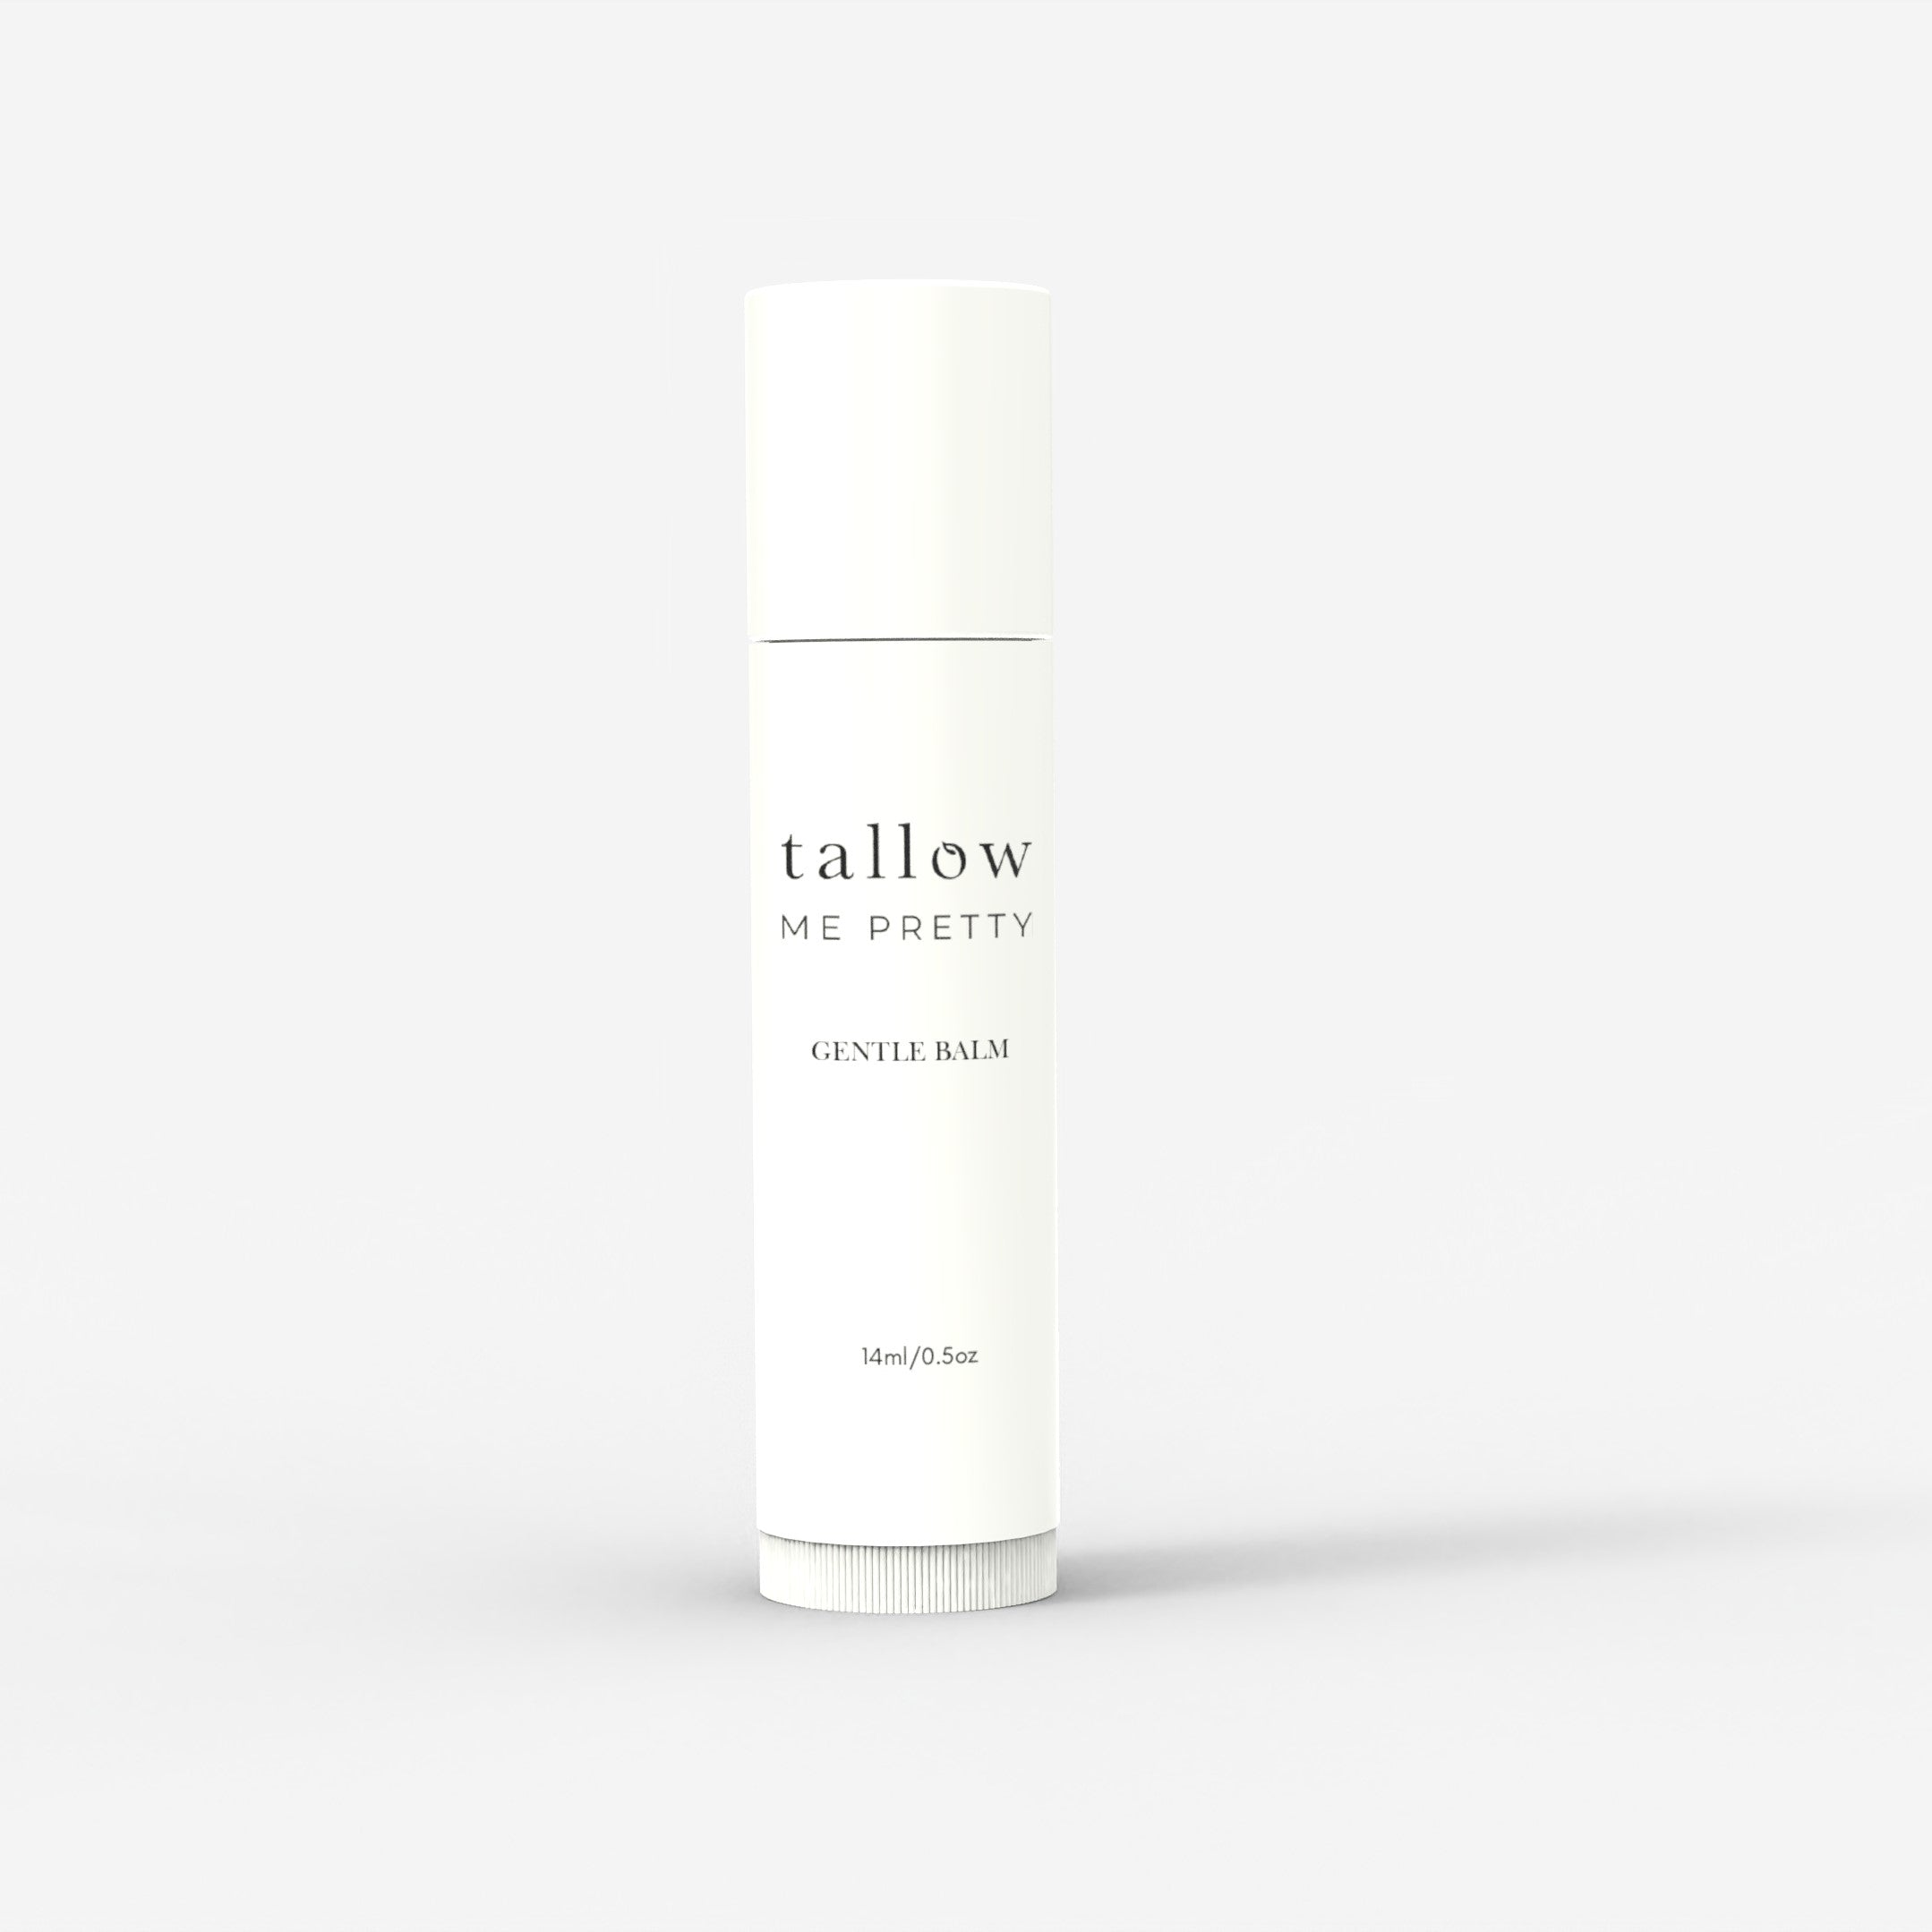 Tallow Me Pretty's Gentle Balm, an organic skincare stick featuring grass-fed tallow, soothing chamomile, and nourishing calendula, perfect for sensitive skin and on-the-go application.